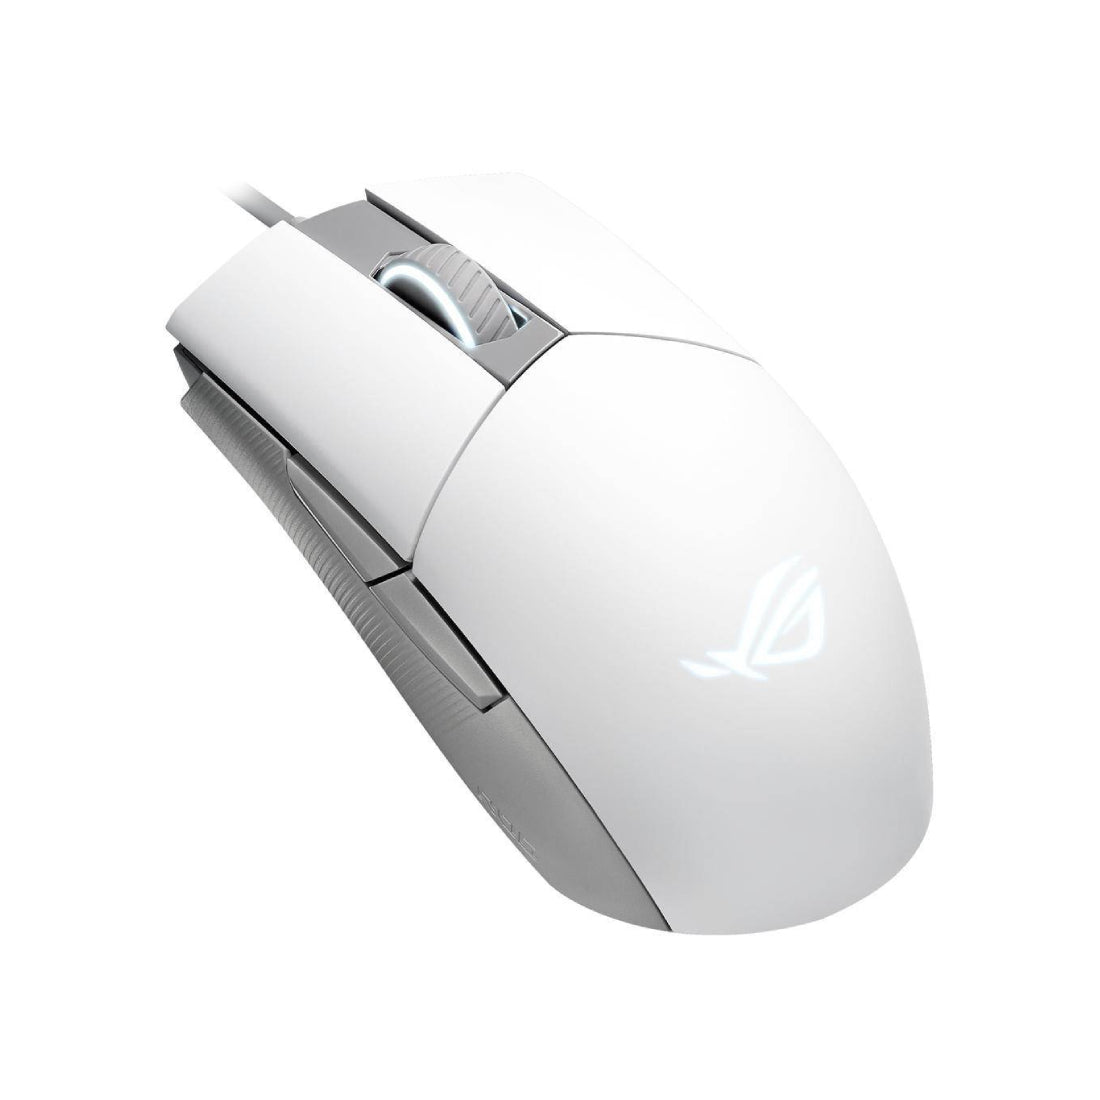 Asus ROG Strix Impact II Moonlight Wired Gaming Mouse - White/ Grey - Store 974 | ستور ٩٧٤